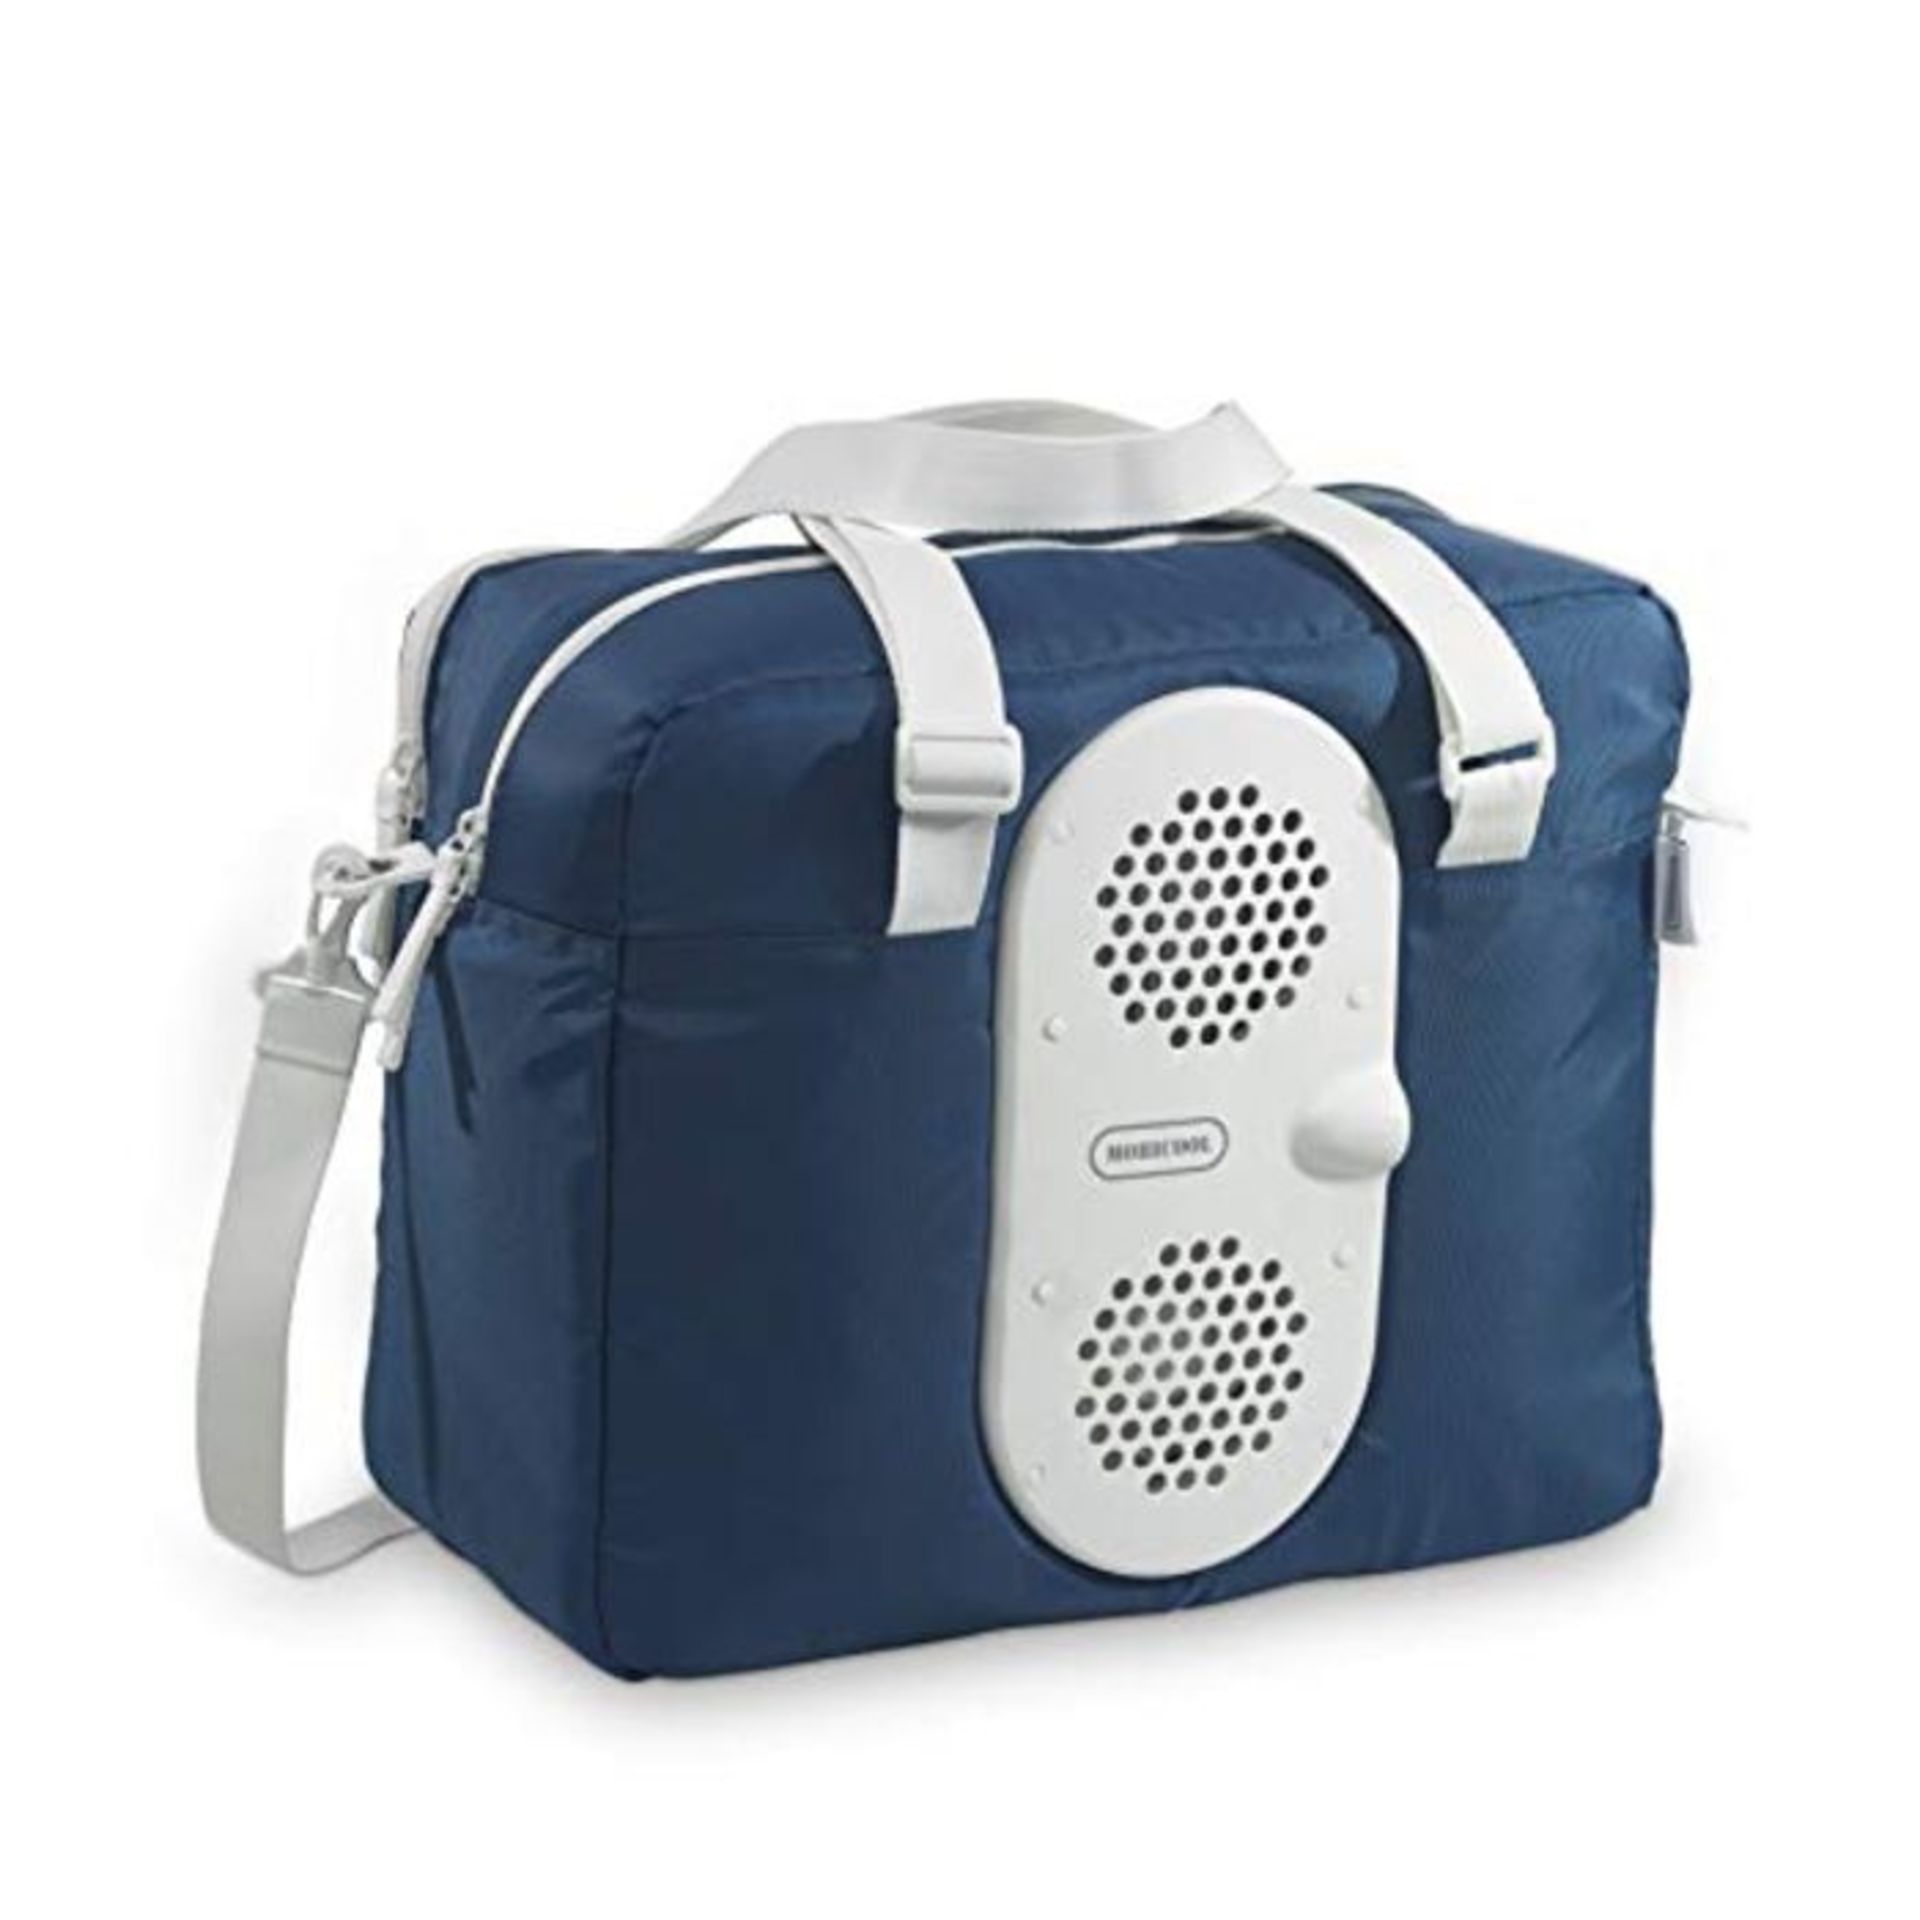 RRP £70.00 MOBICOOL MB25 DC Thermoelectric Cool Bag, Blue, 23 Litre 12 V